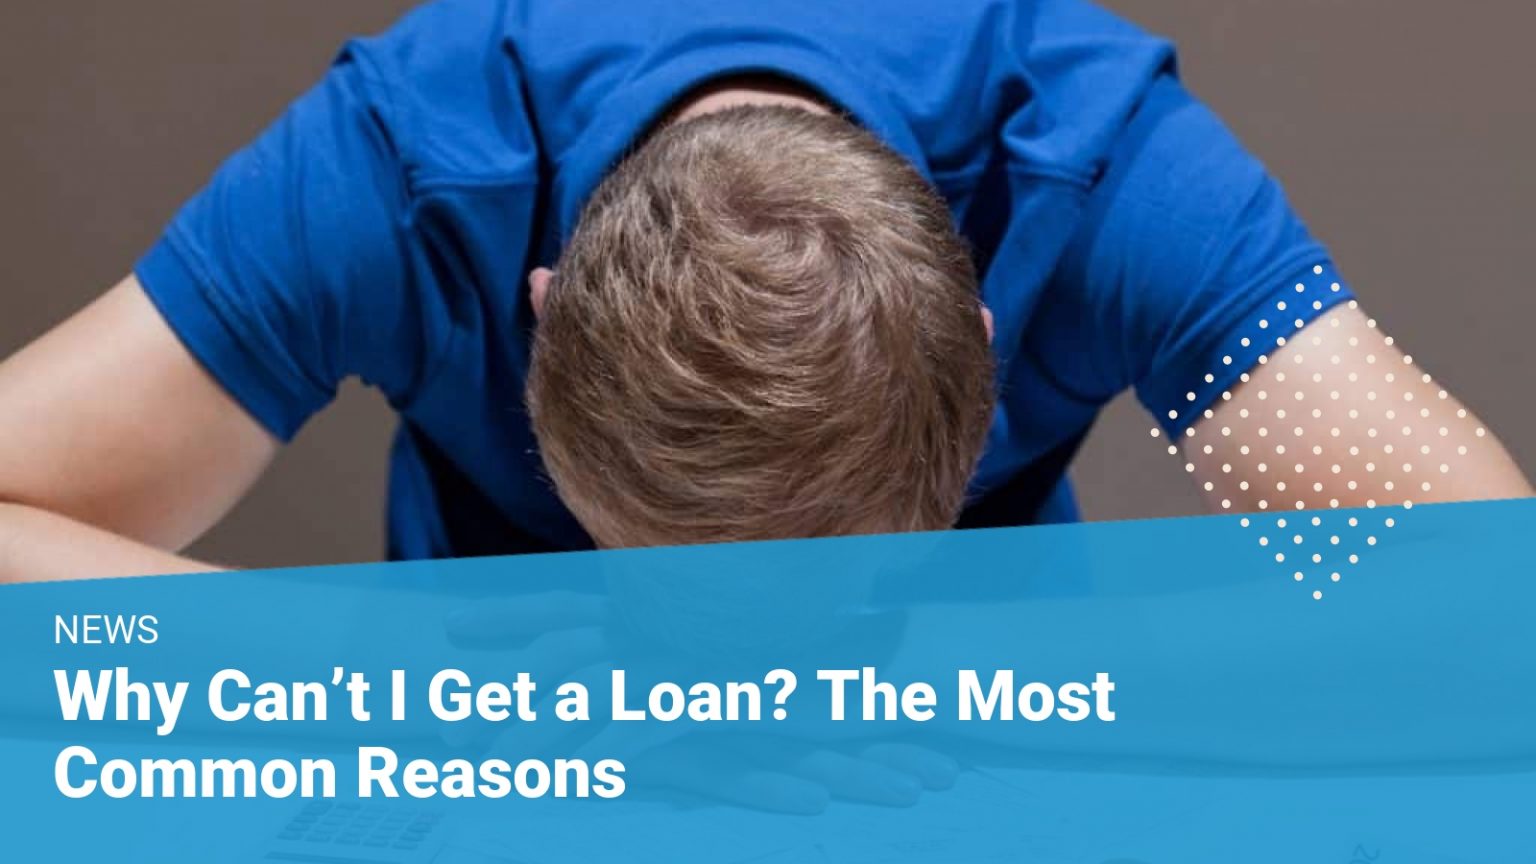 Can’t Get a Loan? Common Reasons Why You Can’t Get a Loan